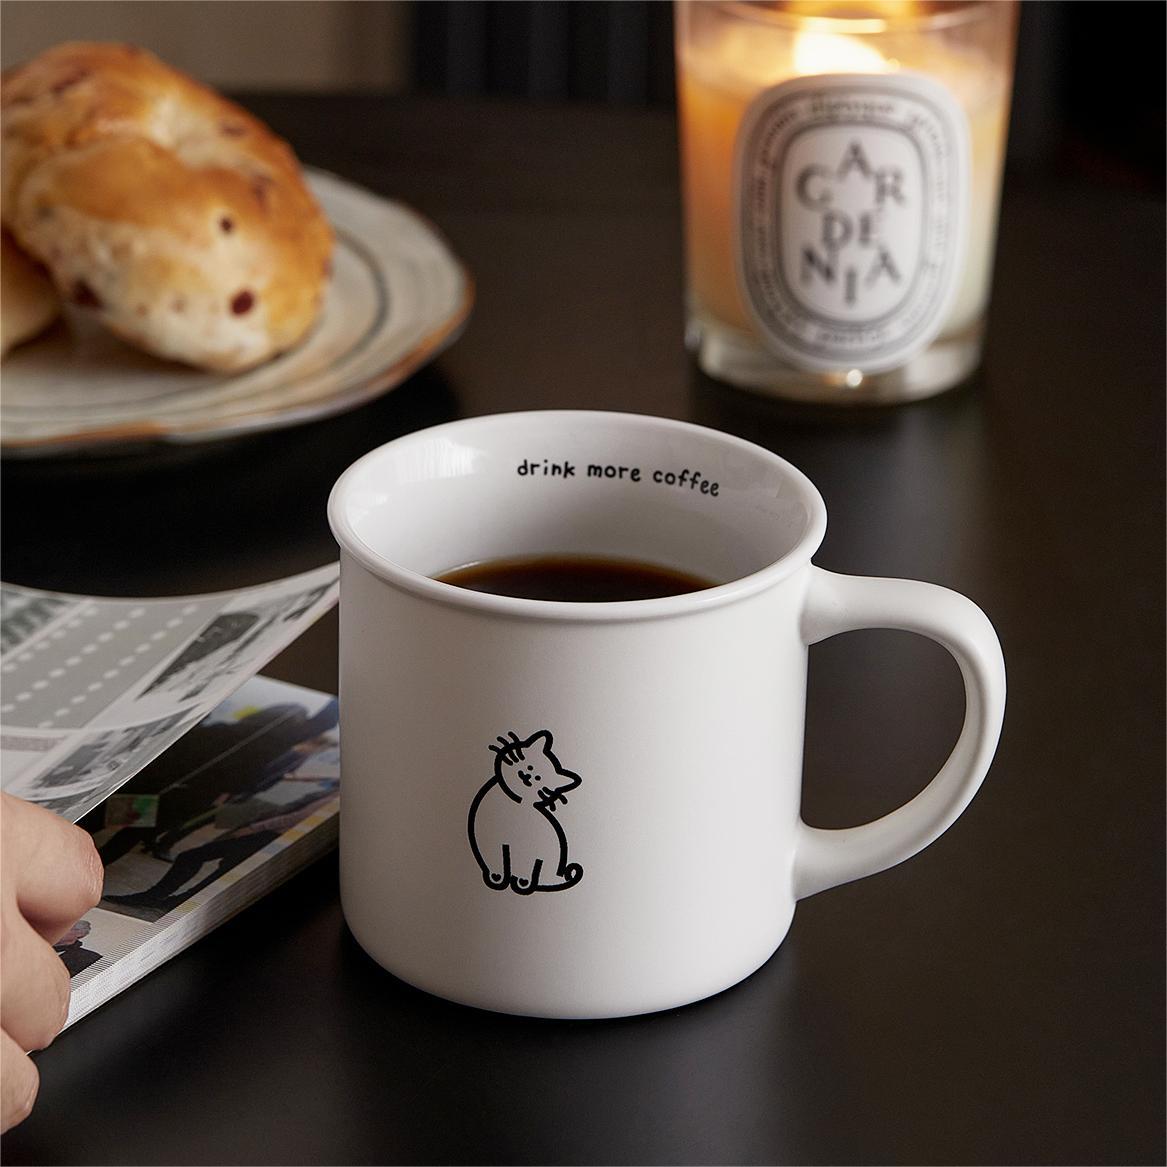 Say Hi Cat Coffee Mug, Cute cat cocked its head and looked at you. White Ceramic Coffee Mug, Pawsome Gift for Cat Lovers and Cat Owners